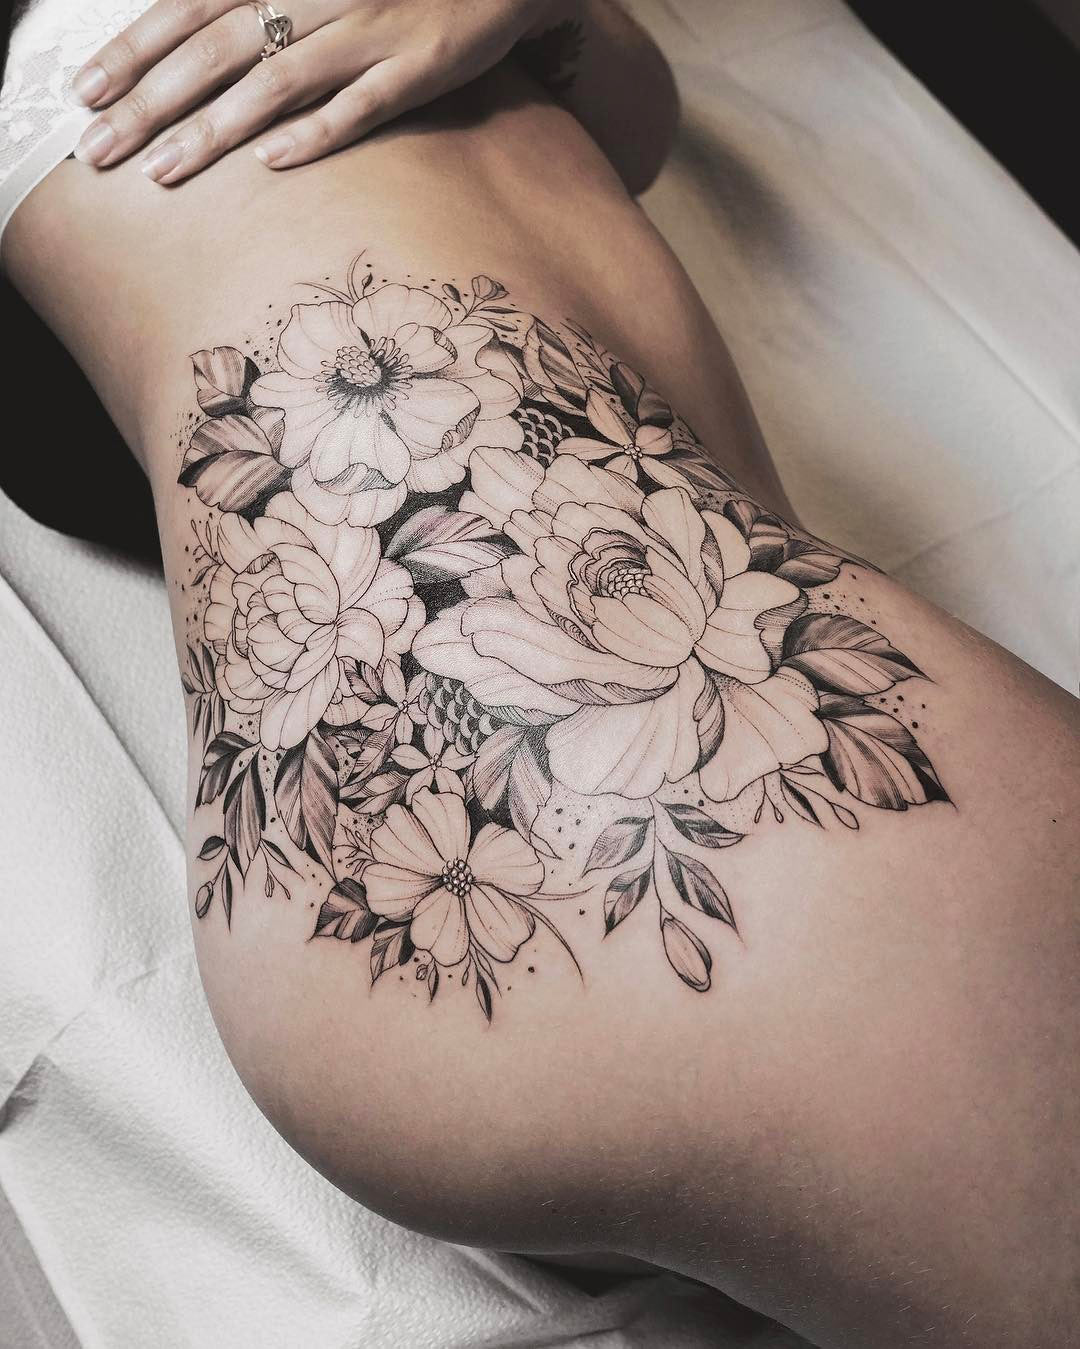 There are several types of thigh tattoos that are very beautiful. You can choose a rose flower, butterfly, or dragon to adorn your thigh.